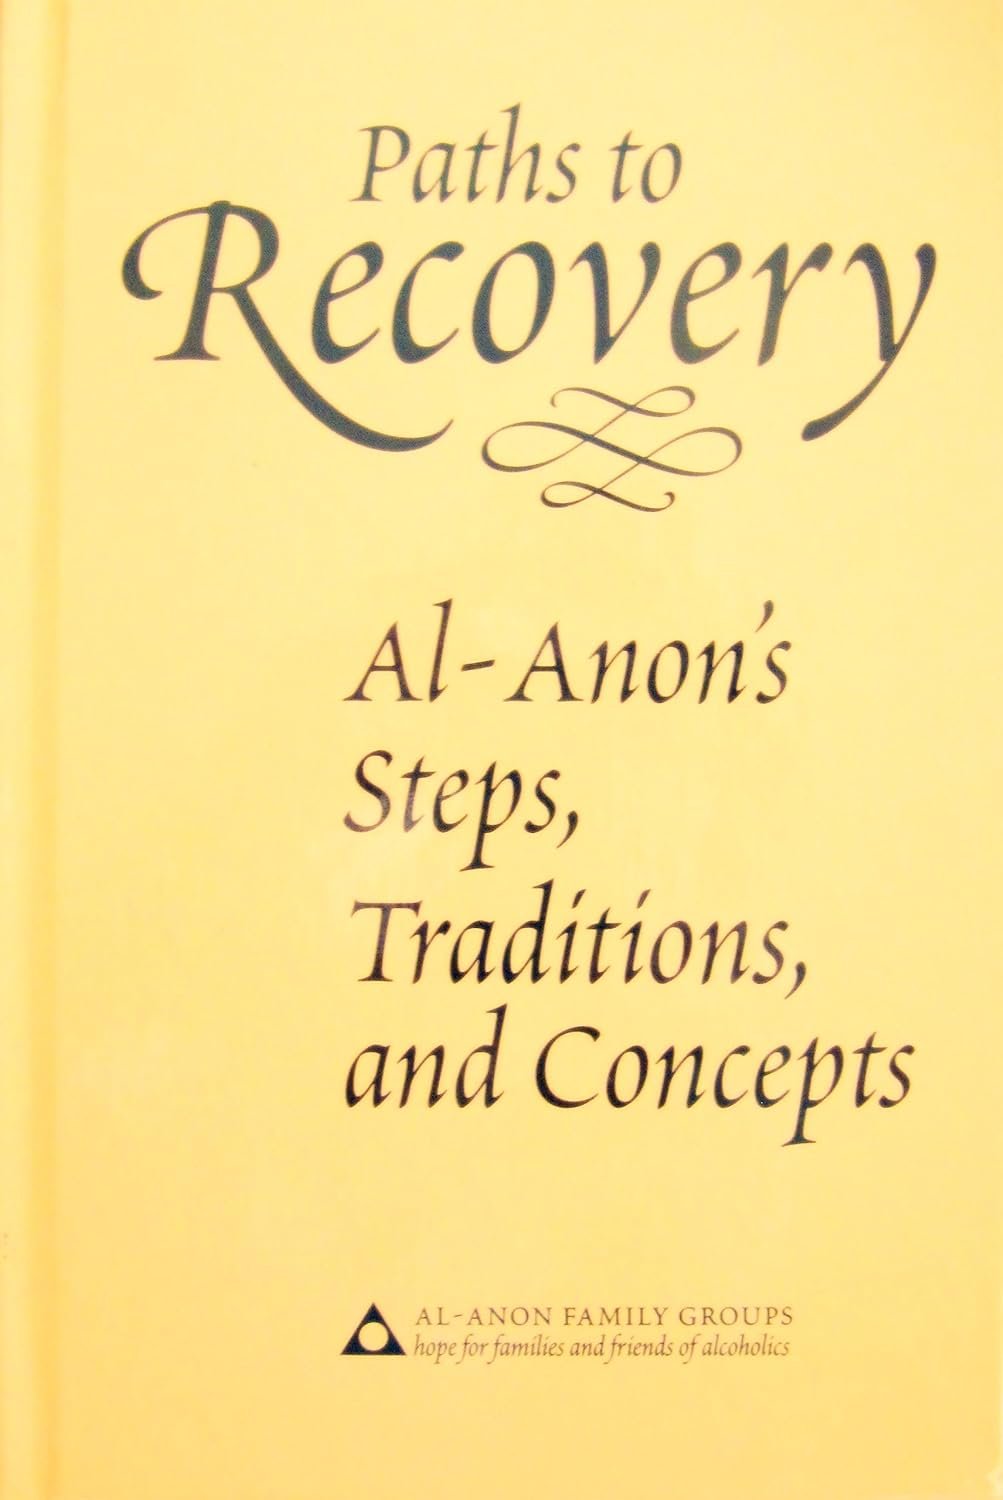  Paths to Recovery: Al-Anon's Steps, Traditions and Concepts